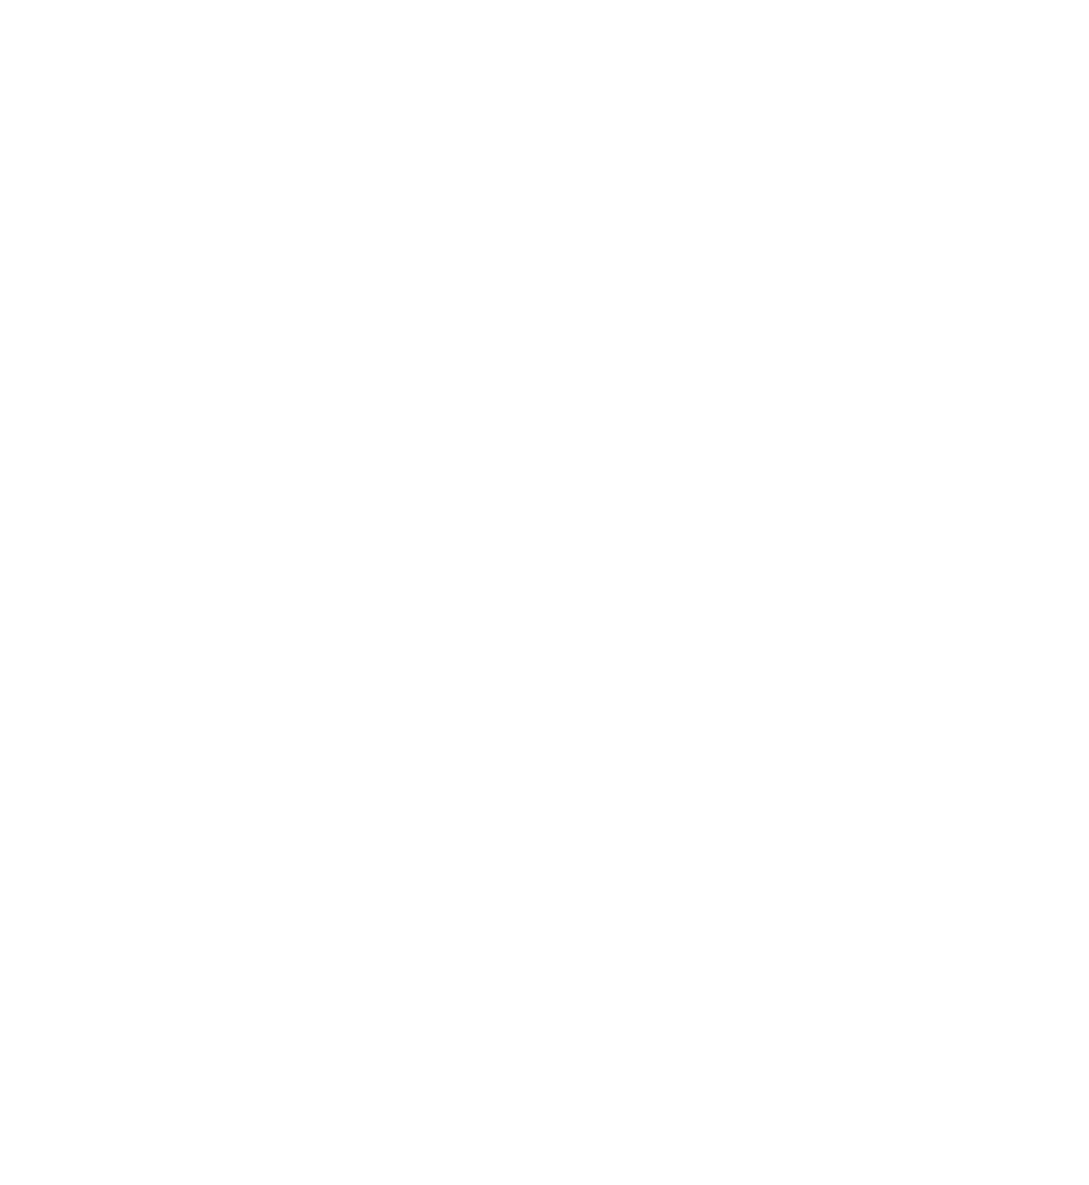 Buglife's B-Lines campaign